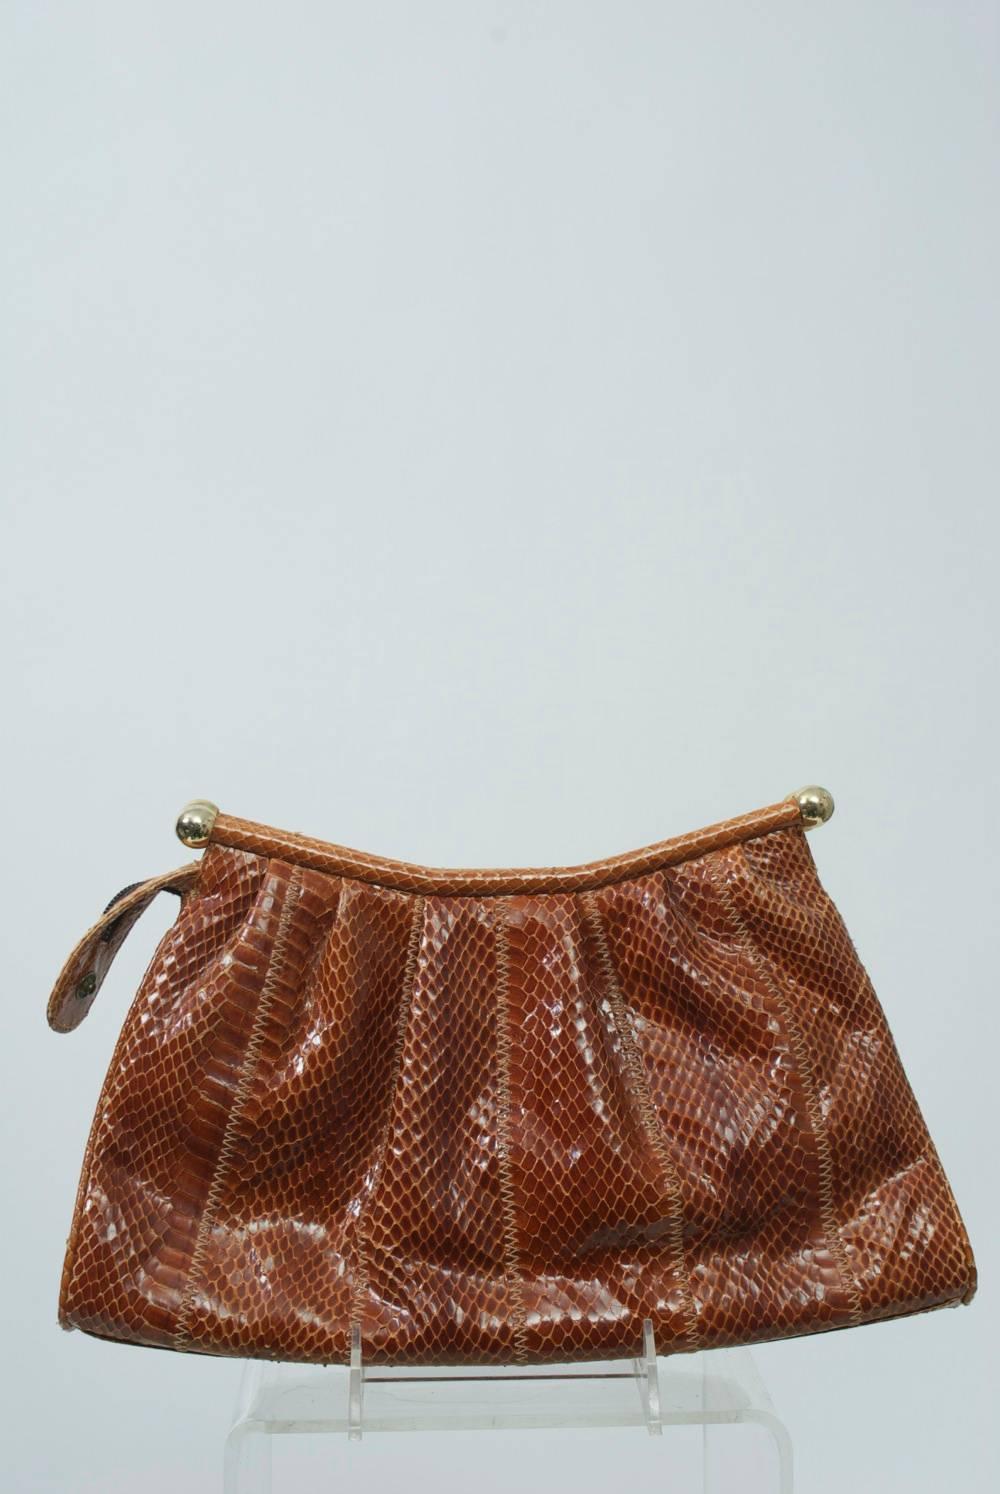 1980s snake clutch by Susan Gail in tobacco features top zipper and attachable long shoulder strap.